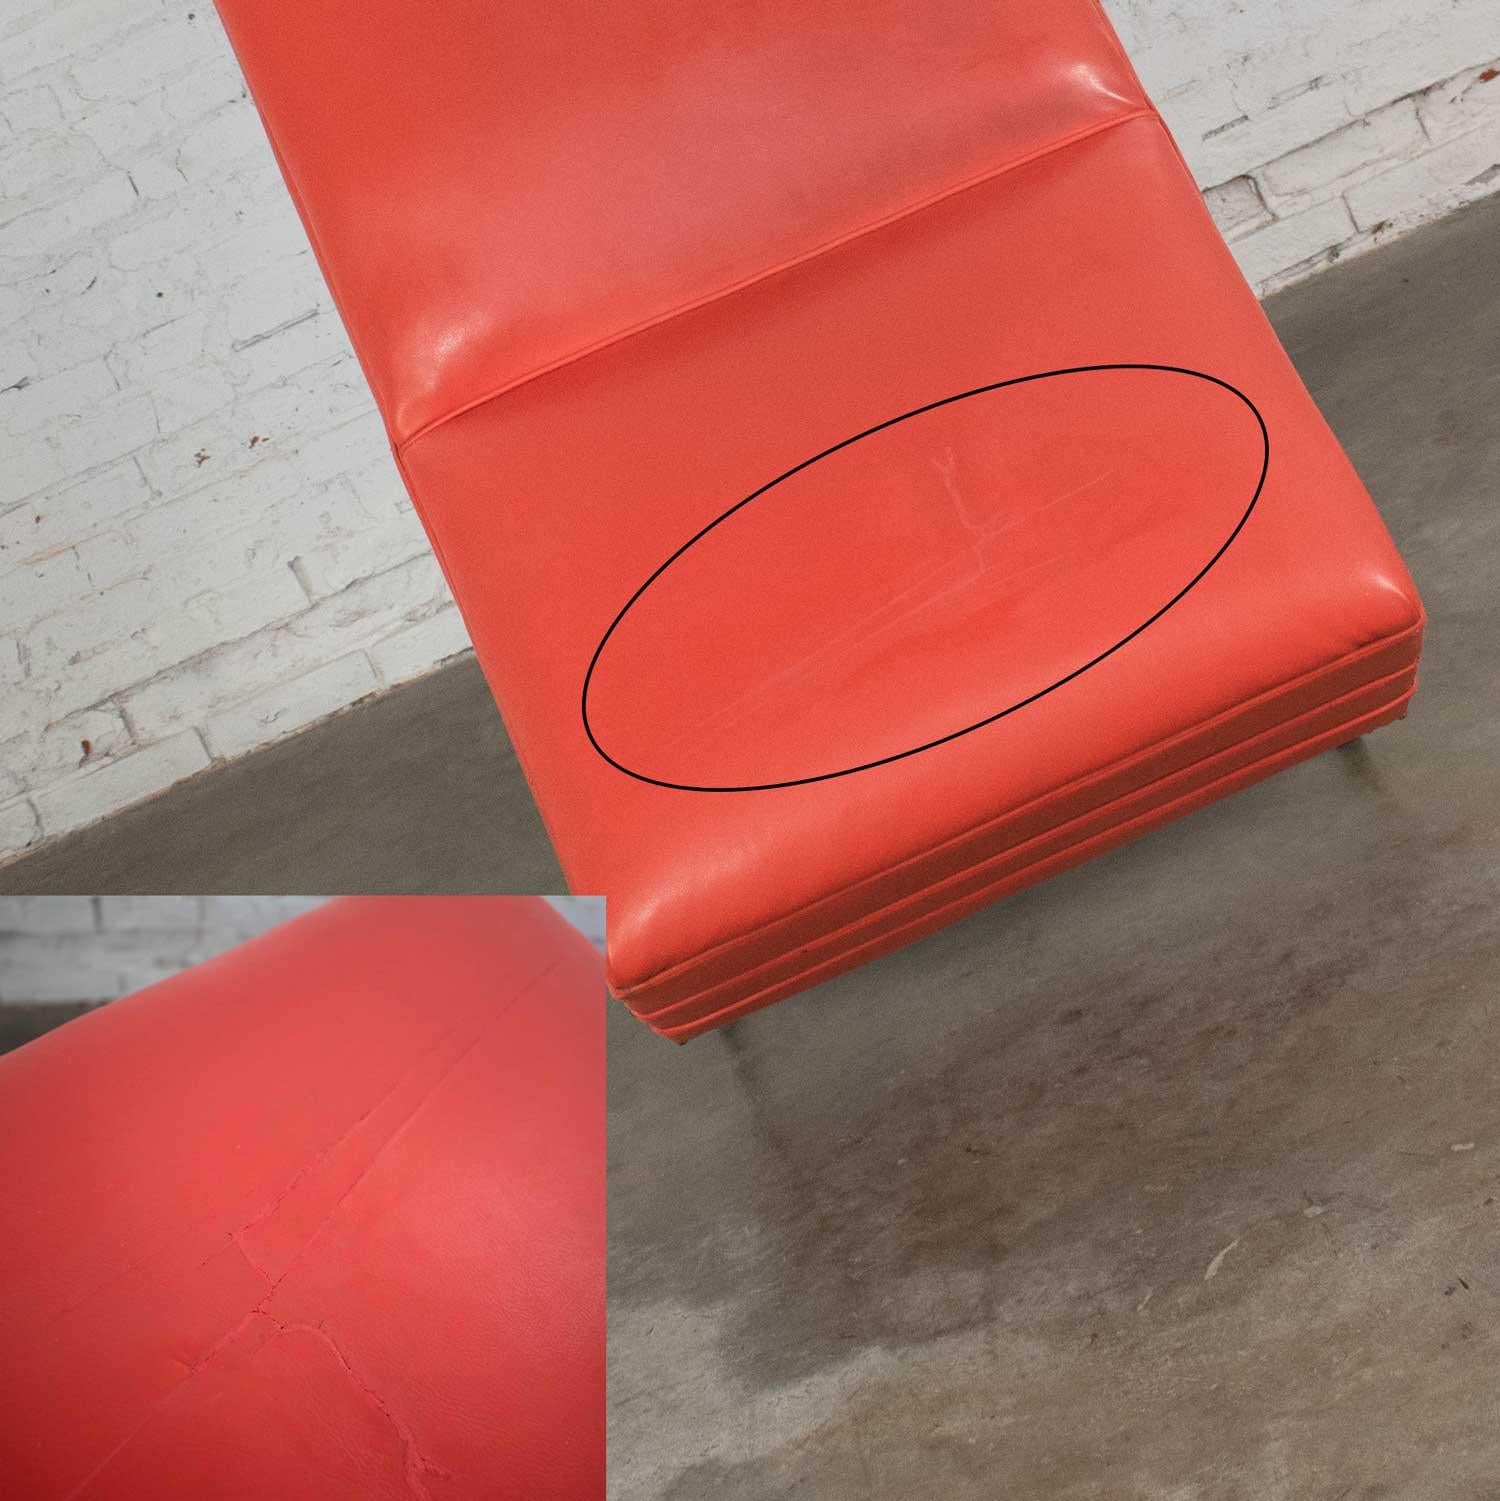 Mid-Century Modern Chaise or Day Bed in Coral Vinyl Faux Leather Aluminum Legs For Sale 6